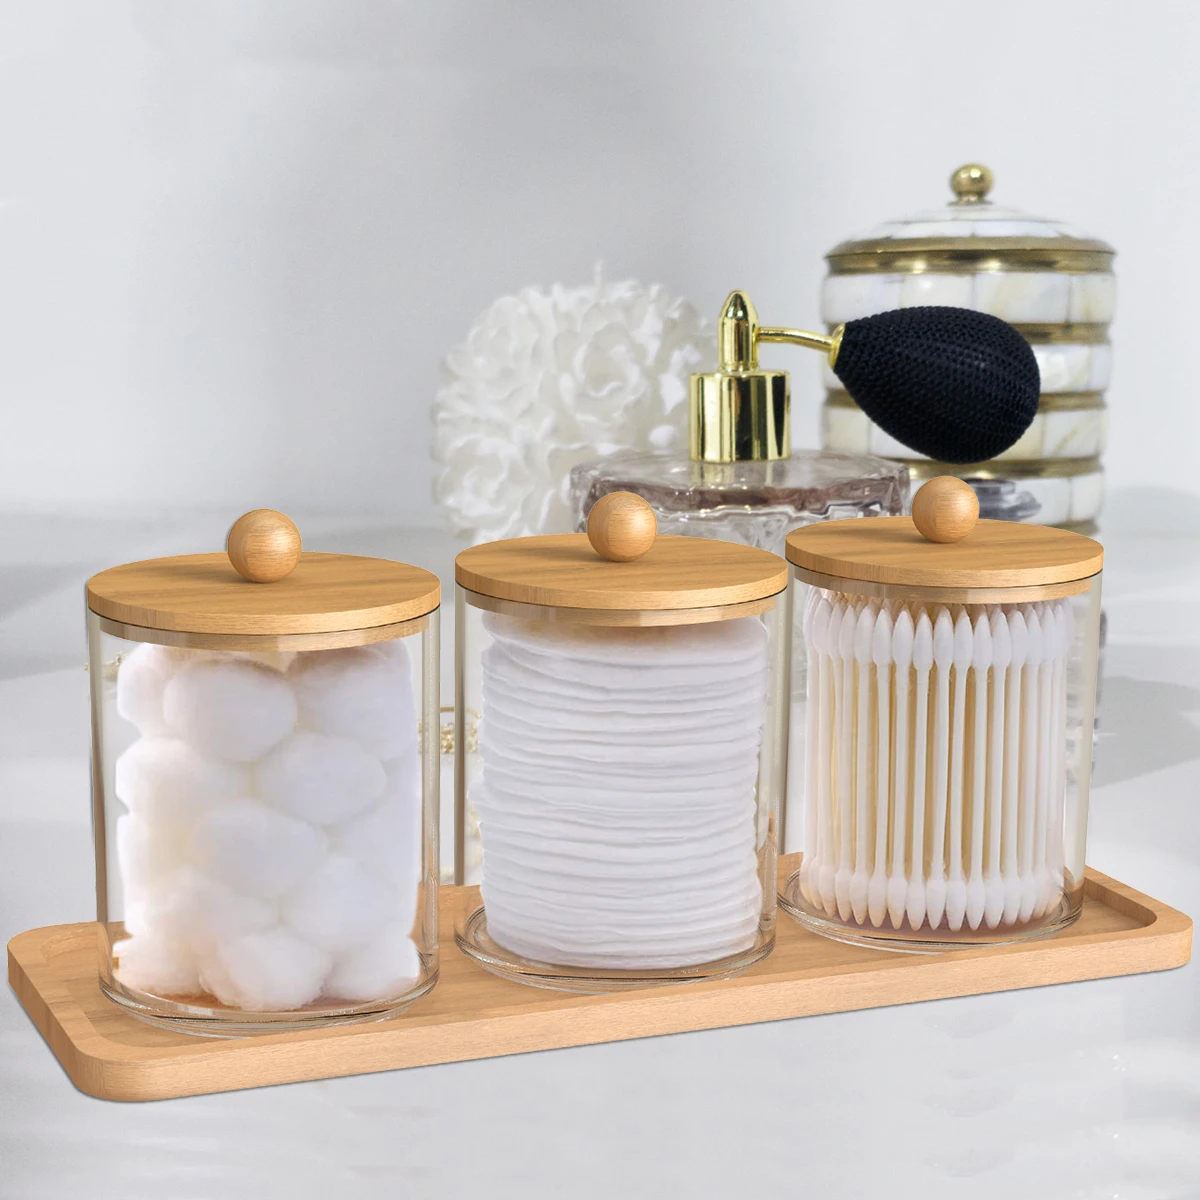 

3Pcs Qtip Holder Dispenser with Bamboo Lids Clear Acrylic Bathroom Jars with Tray Cotton Swab Storage Dispenser Reusable